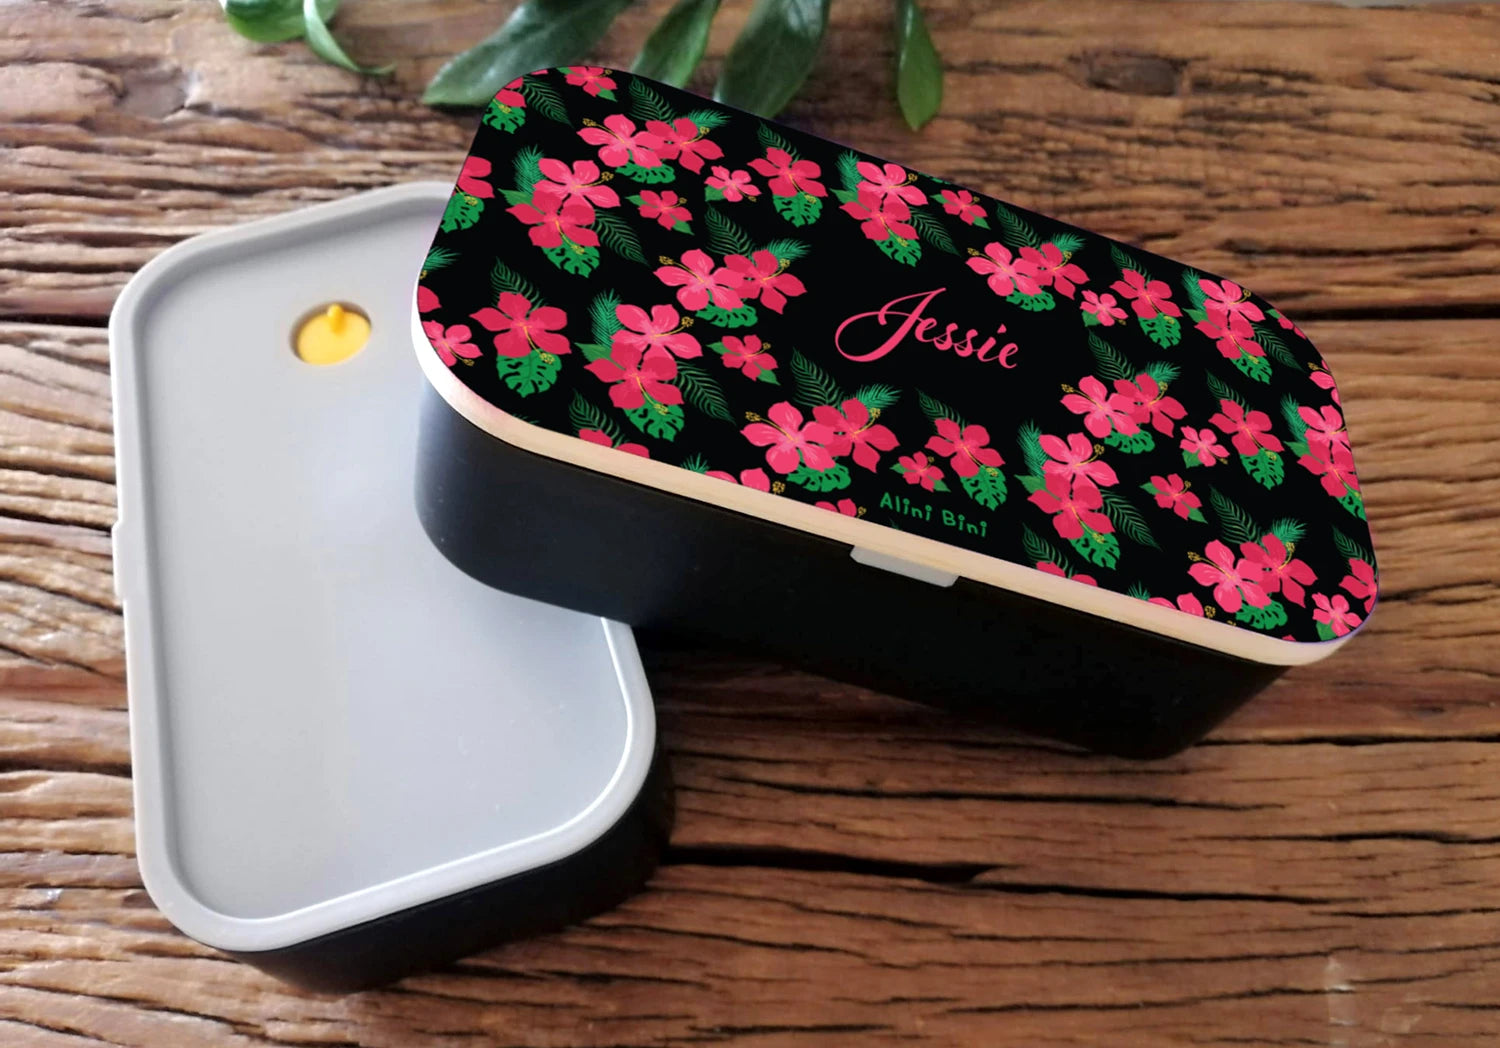 A Munch-Mate lunch box, lying on a wooden table, showing a black and pink floral print, personalised with the name Jessie